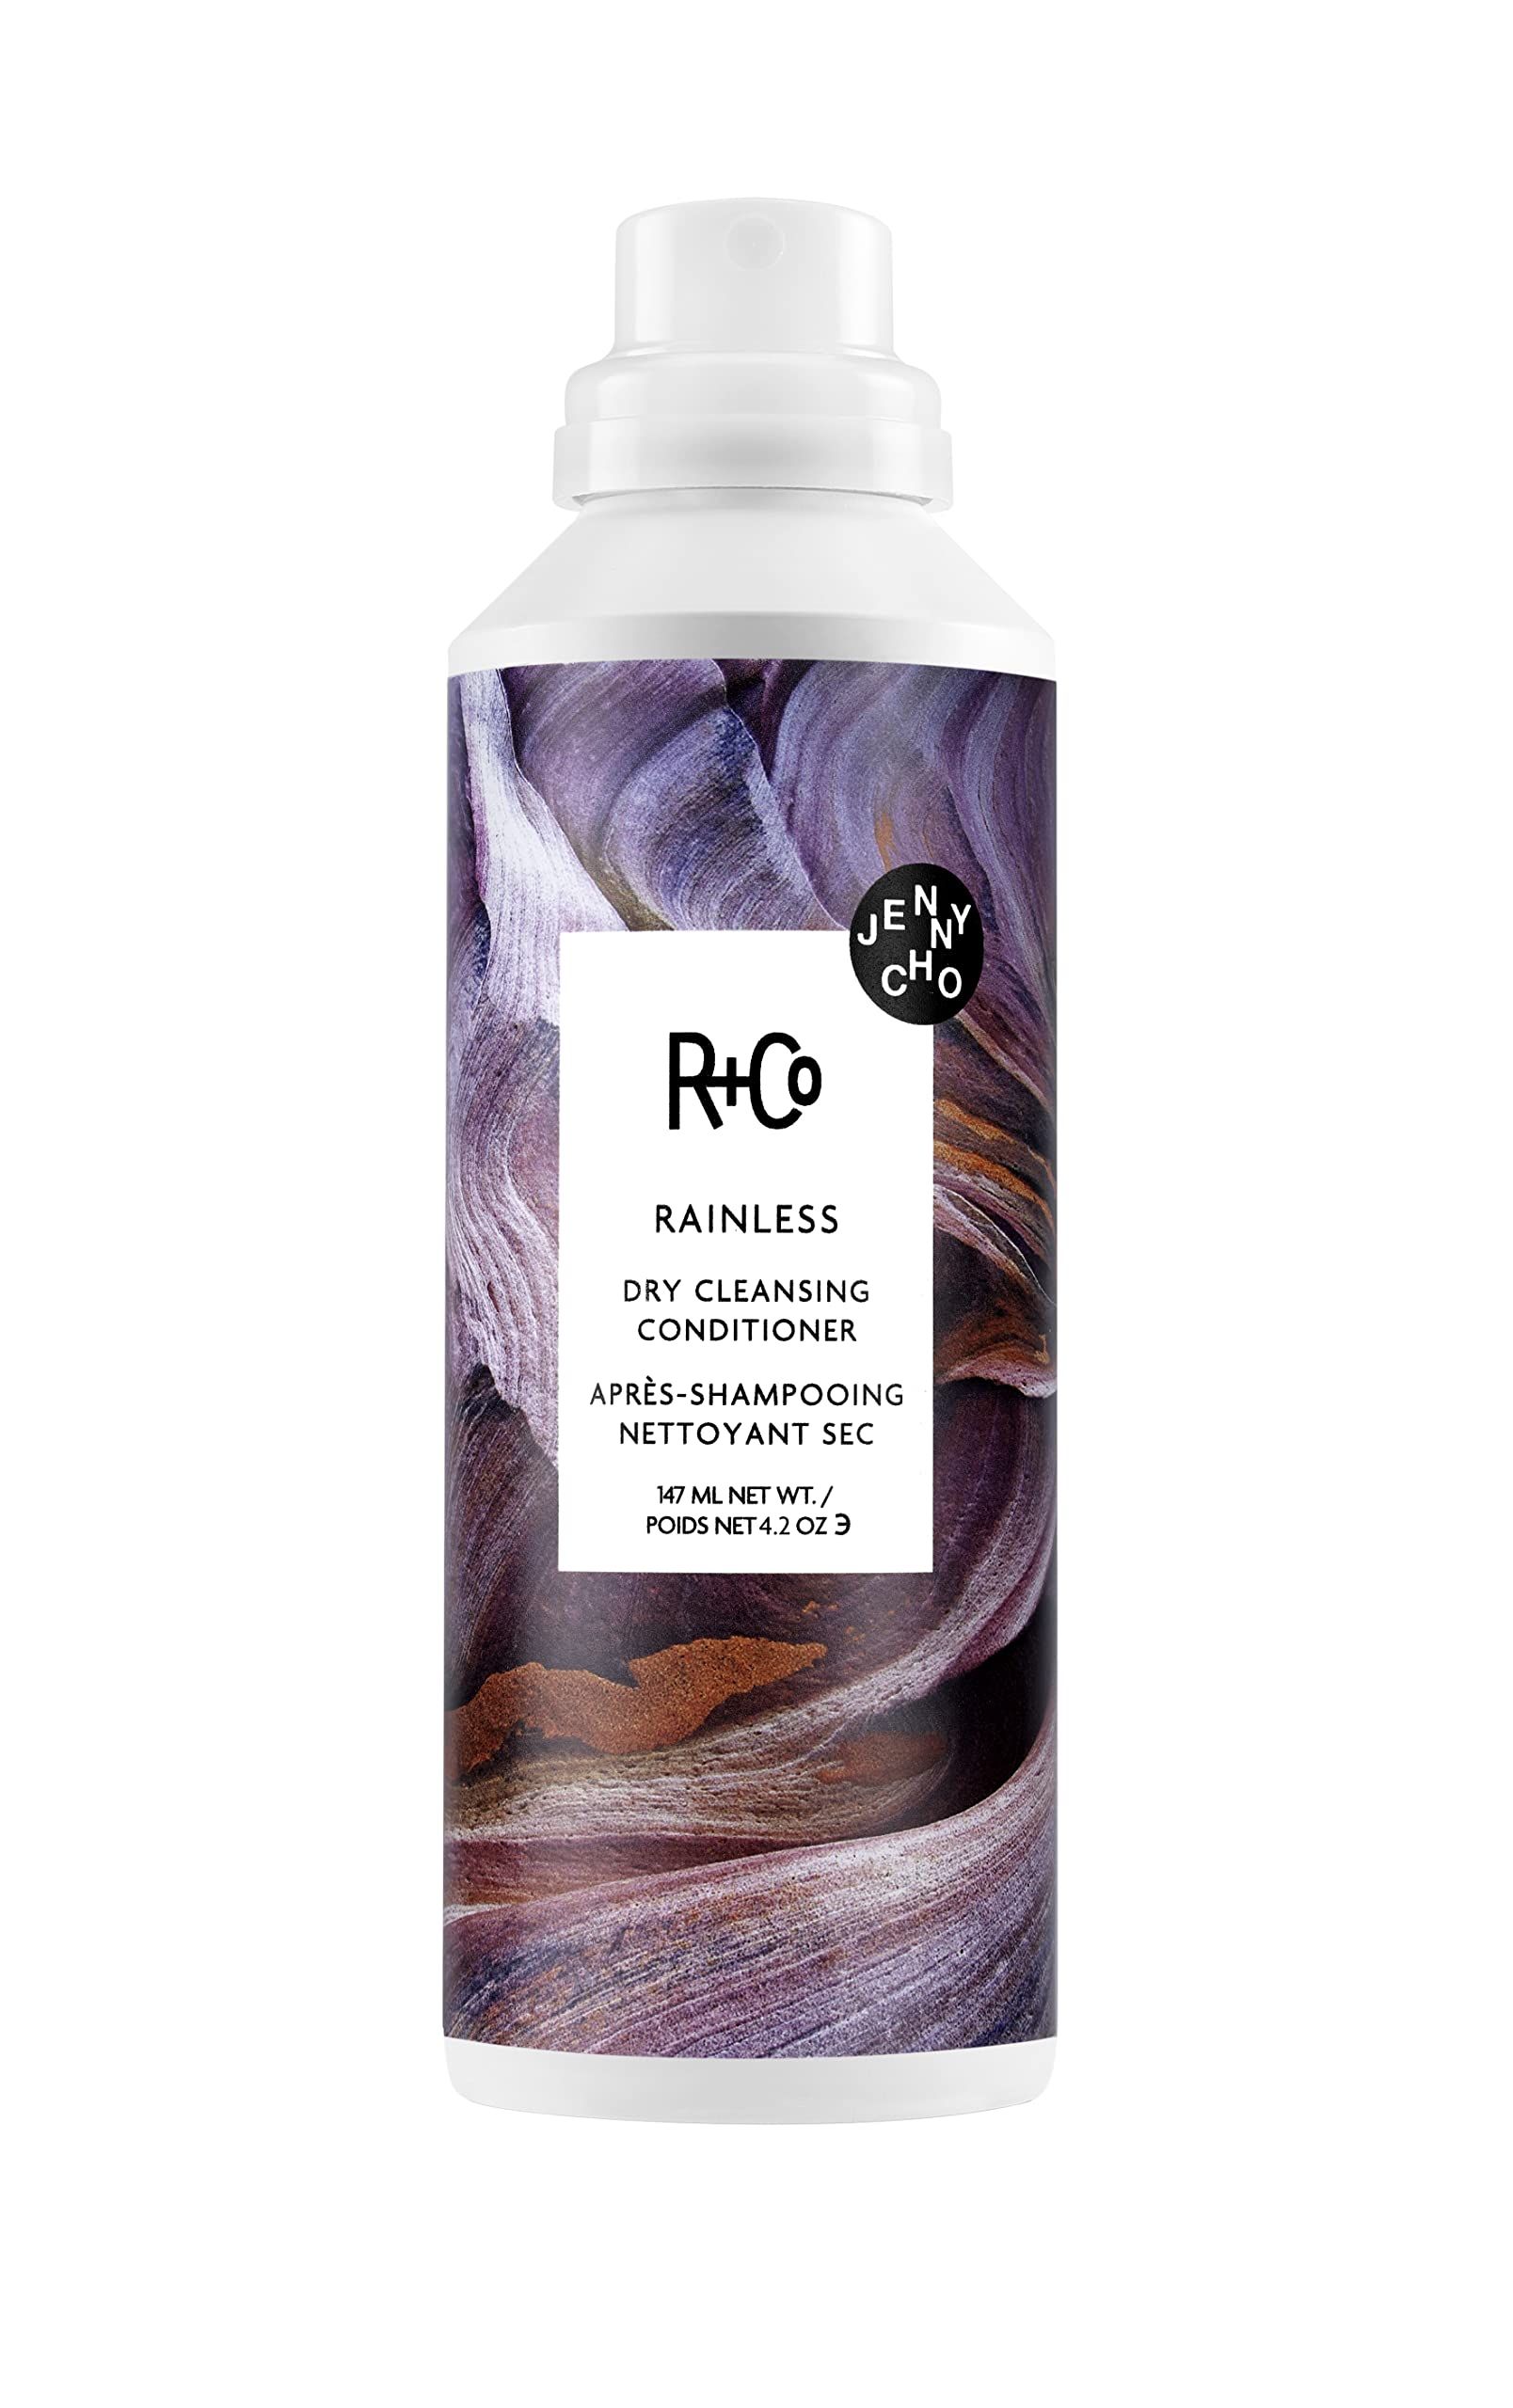 Dry cleansing. R+co rainless Dry Cleansing Conditioner. R+co сухой.